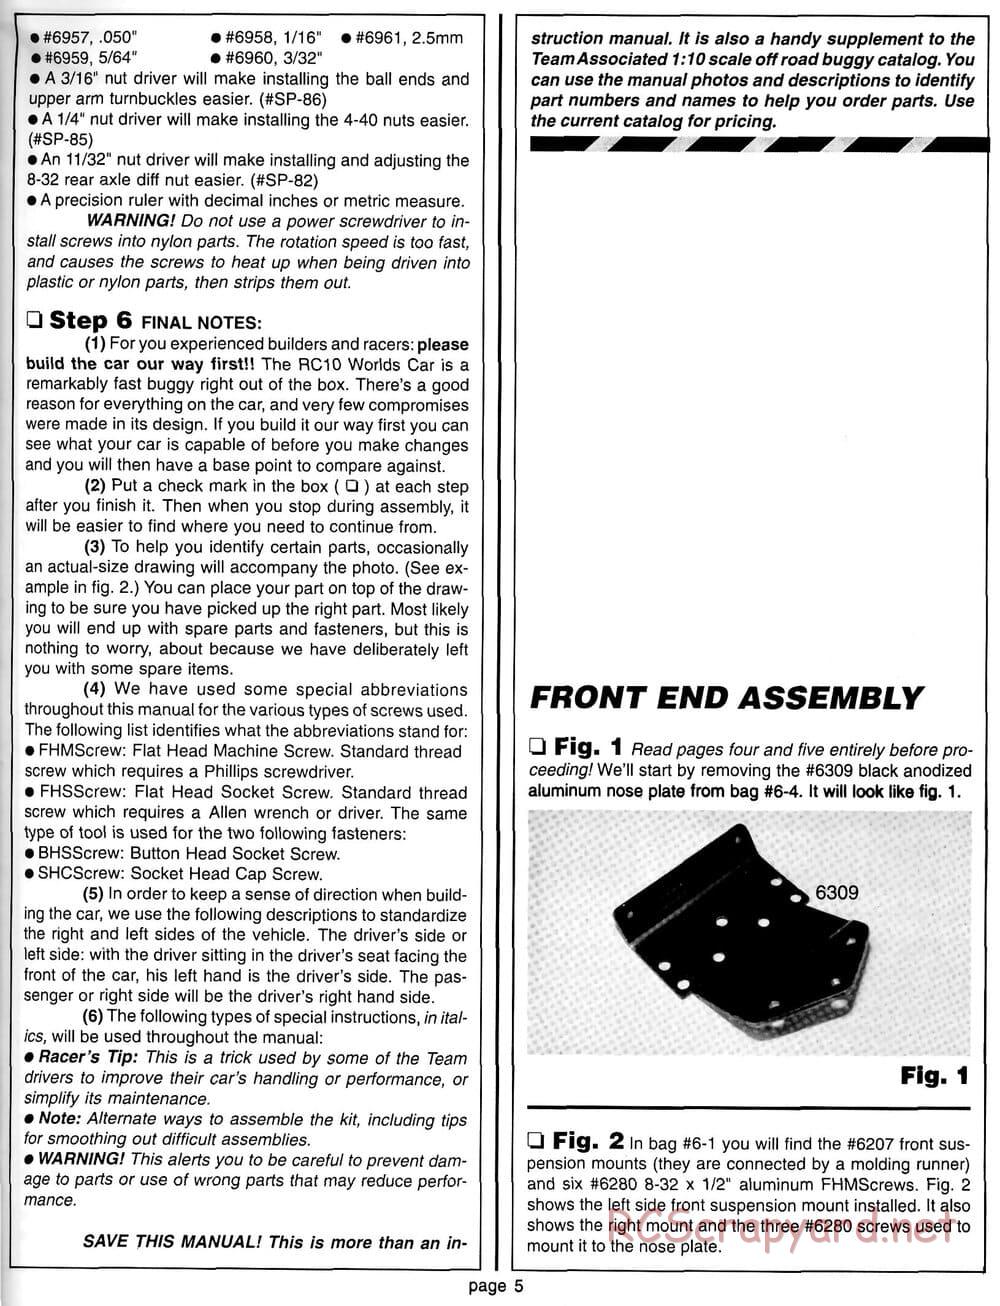 Team Associated - RC10 World's Car - 1994 - 6037 - Manual - Page 4